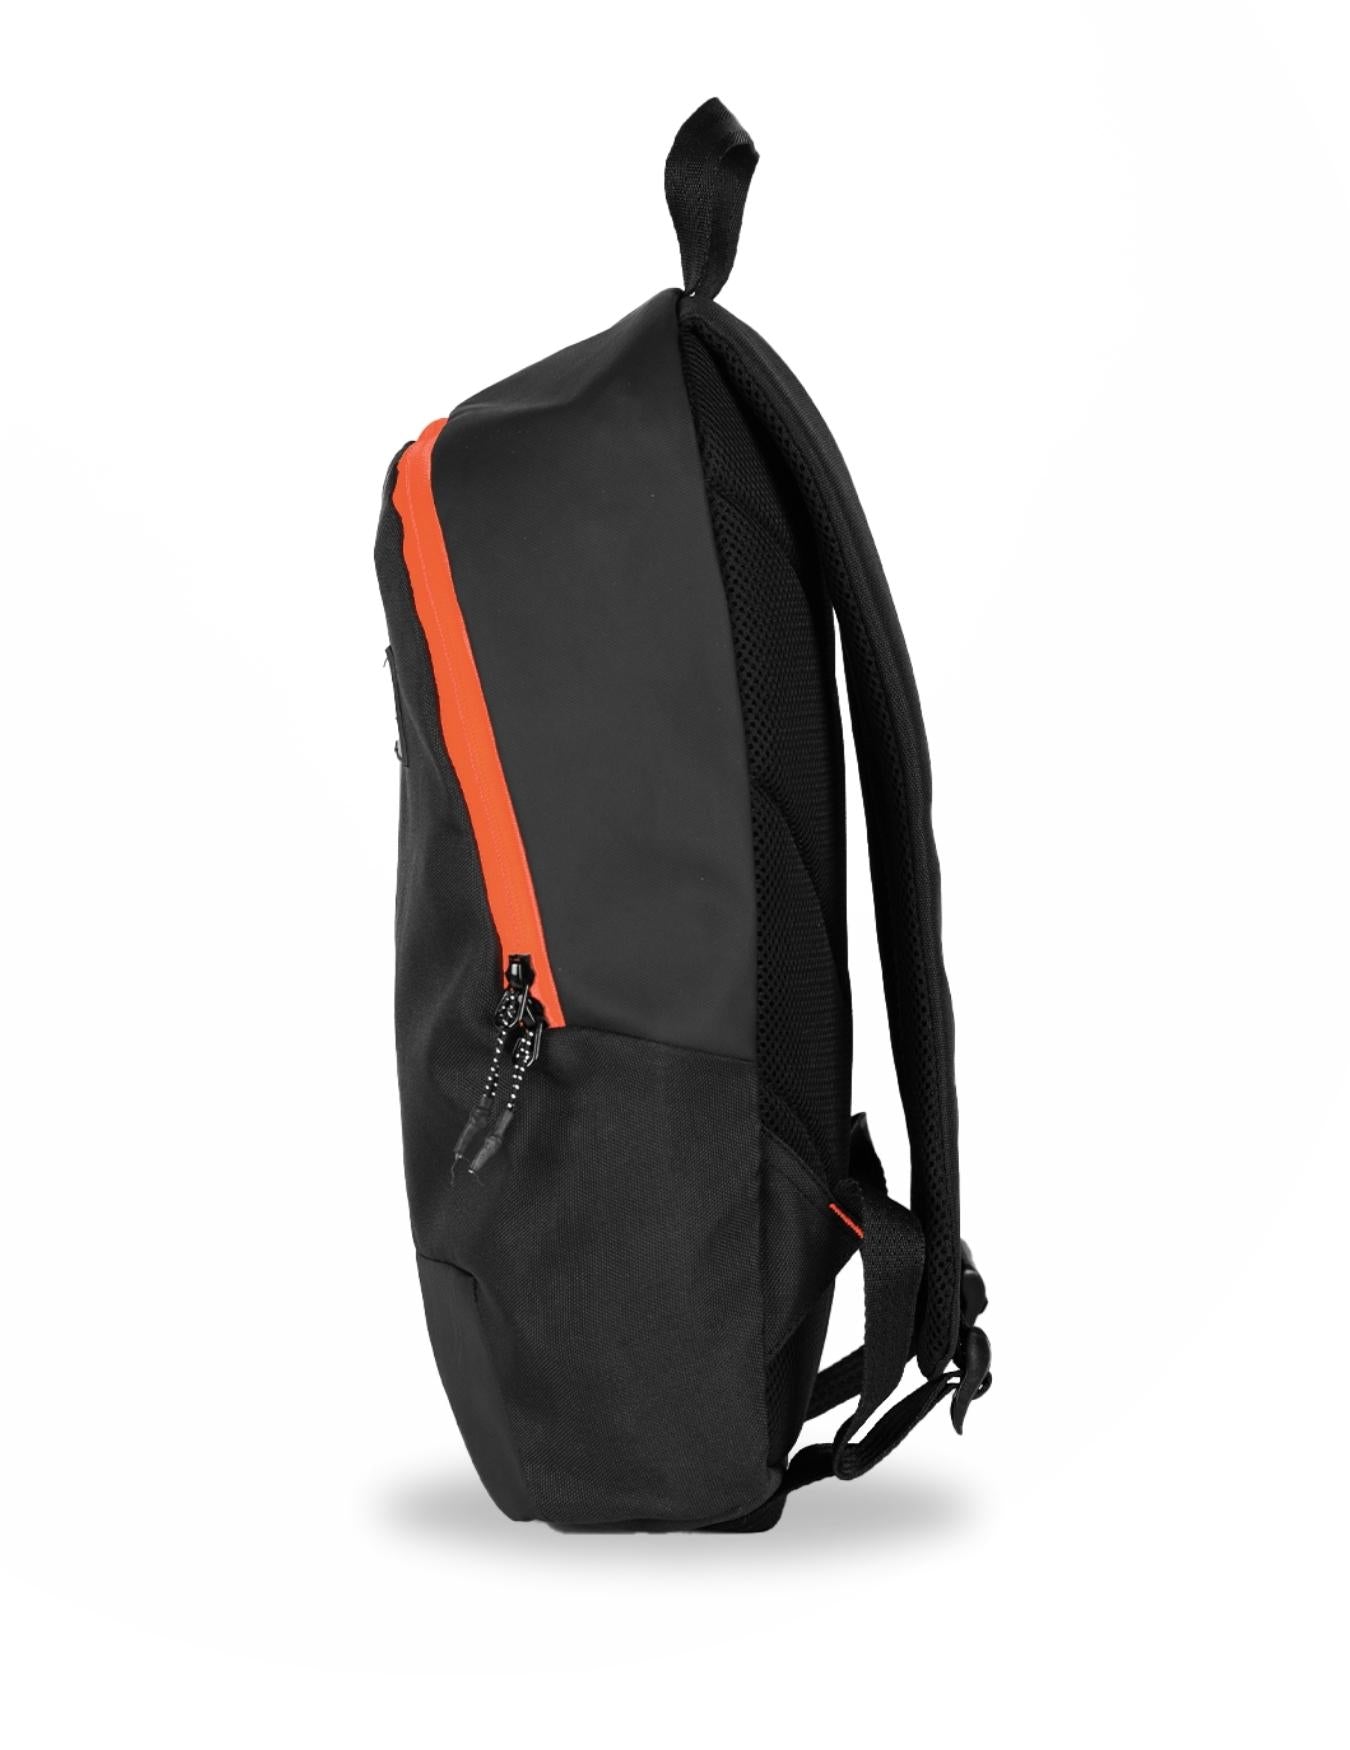 ZoPro DayPacker 15L (Limited Edition)